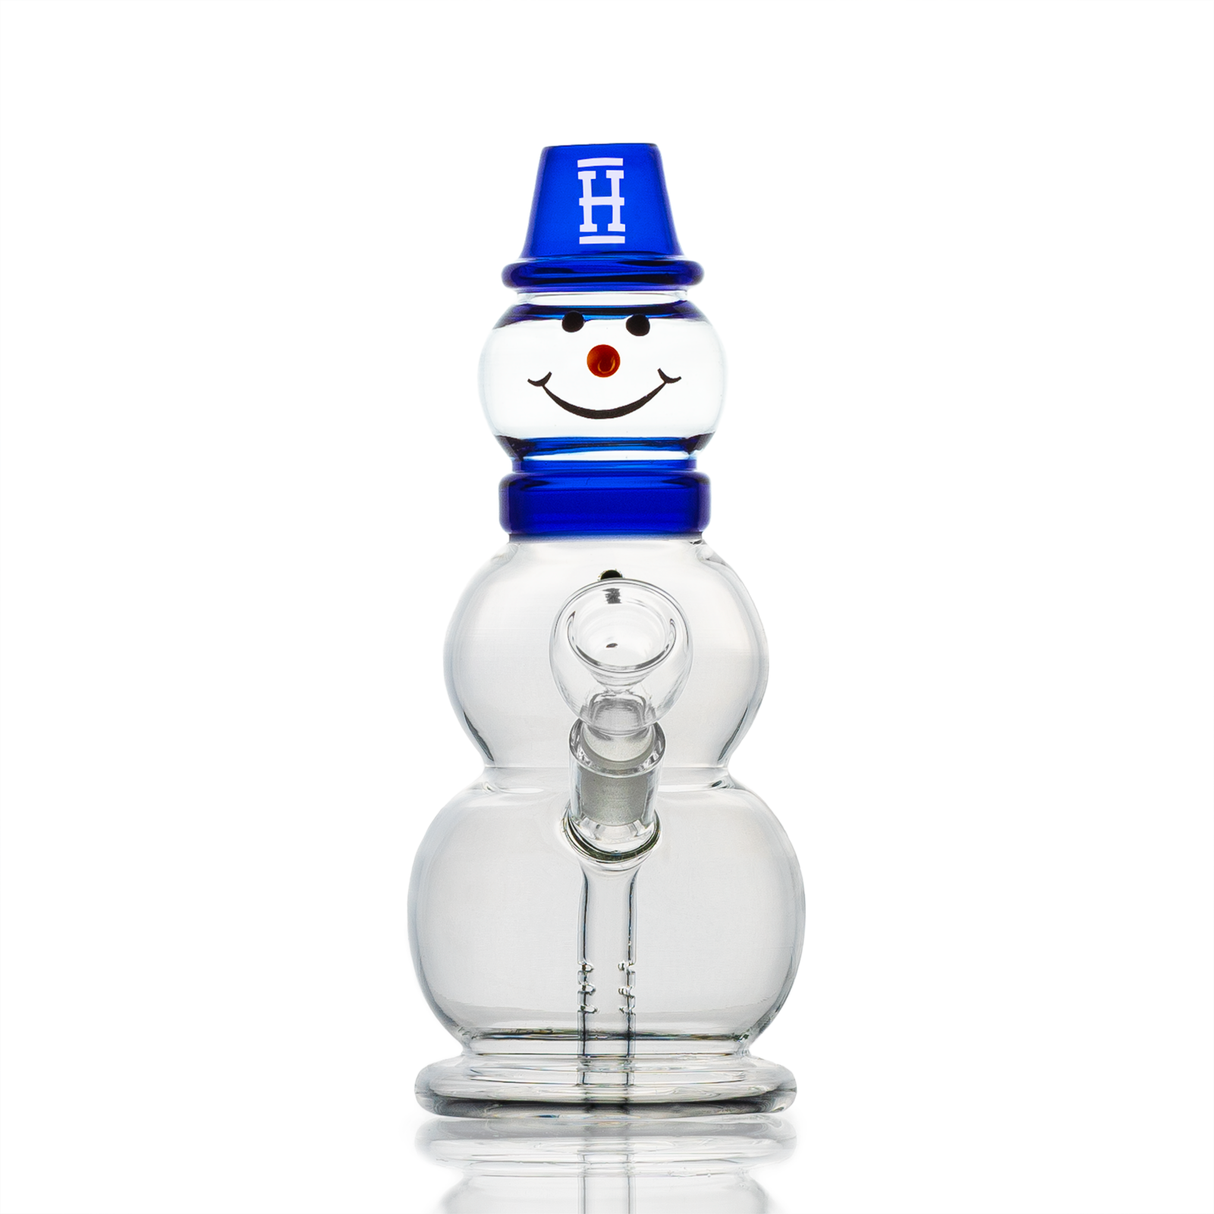 Hemper Snowman Bong 18" with 45 Degree Joint Angle, Front View on Seamless White Background